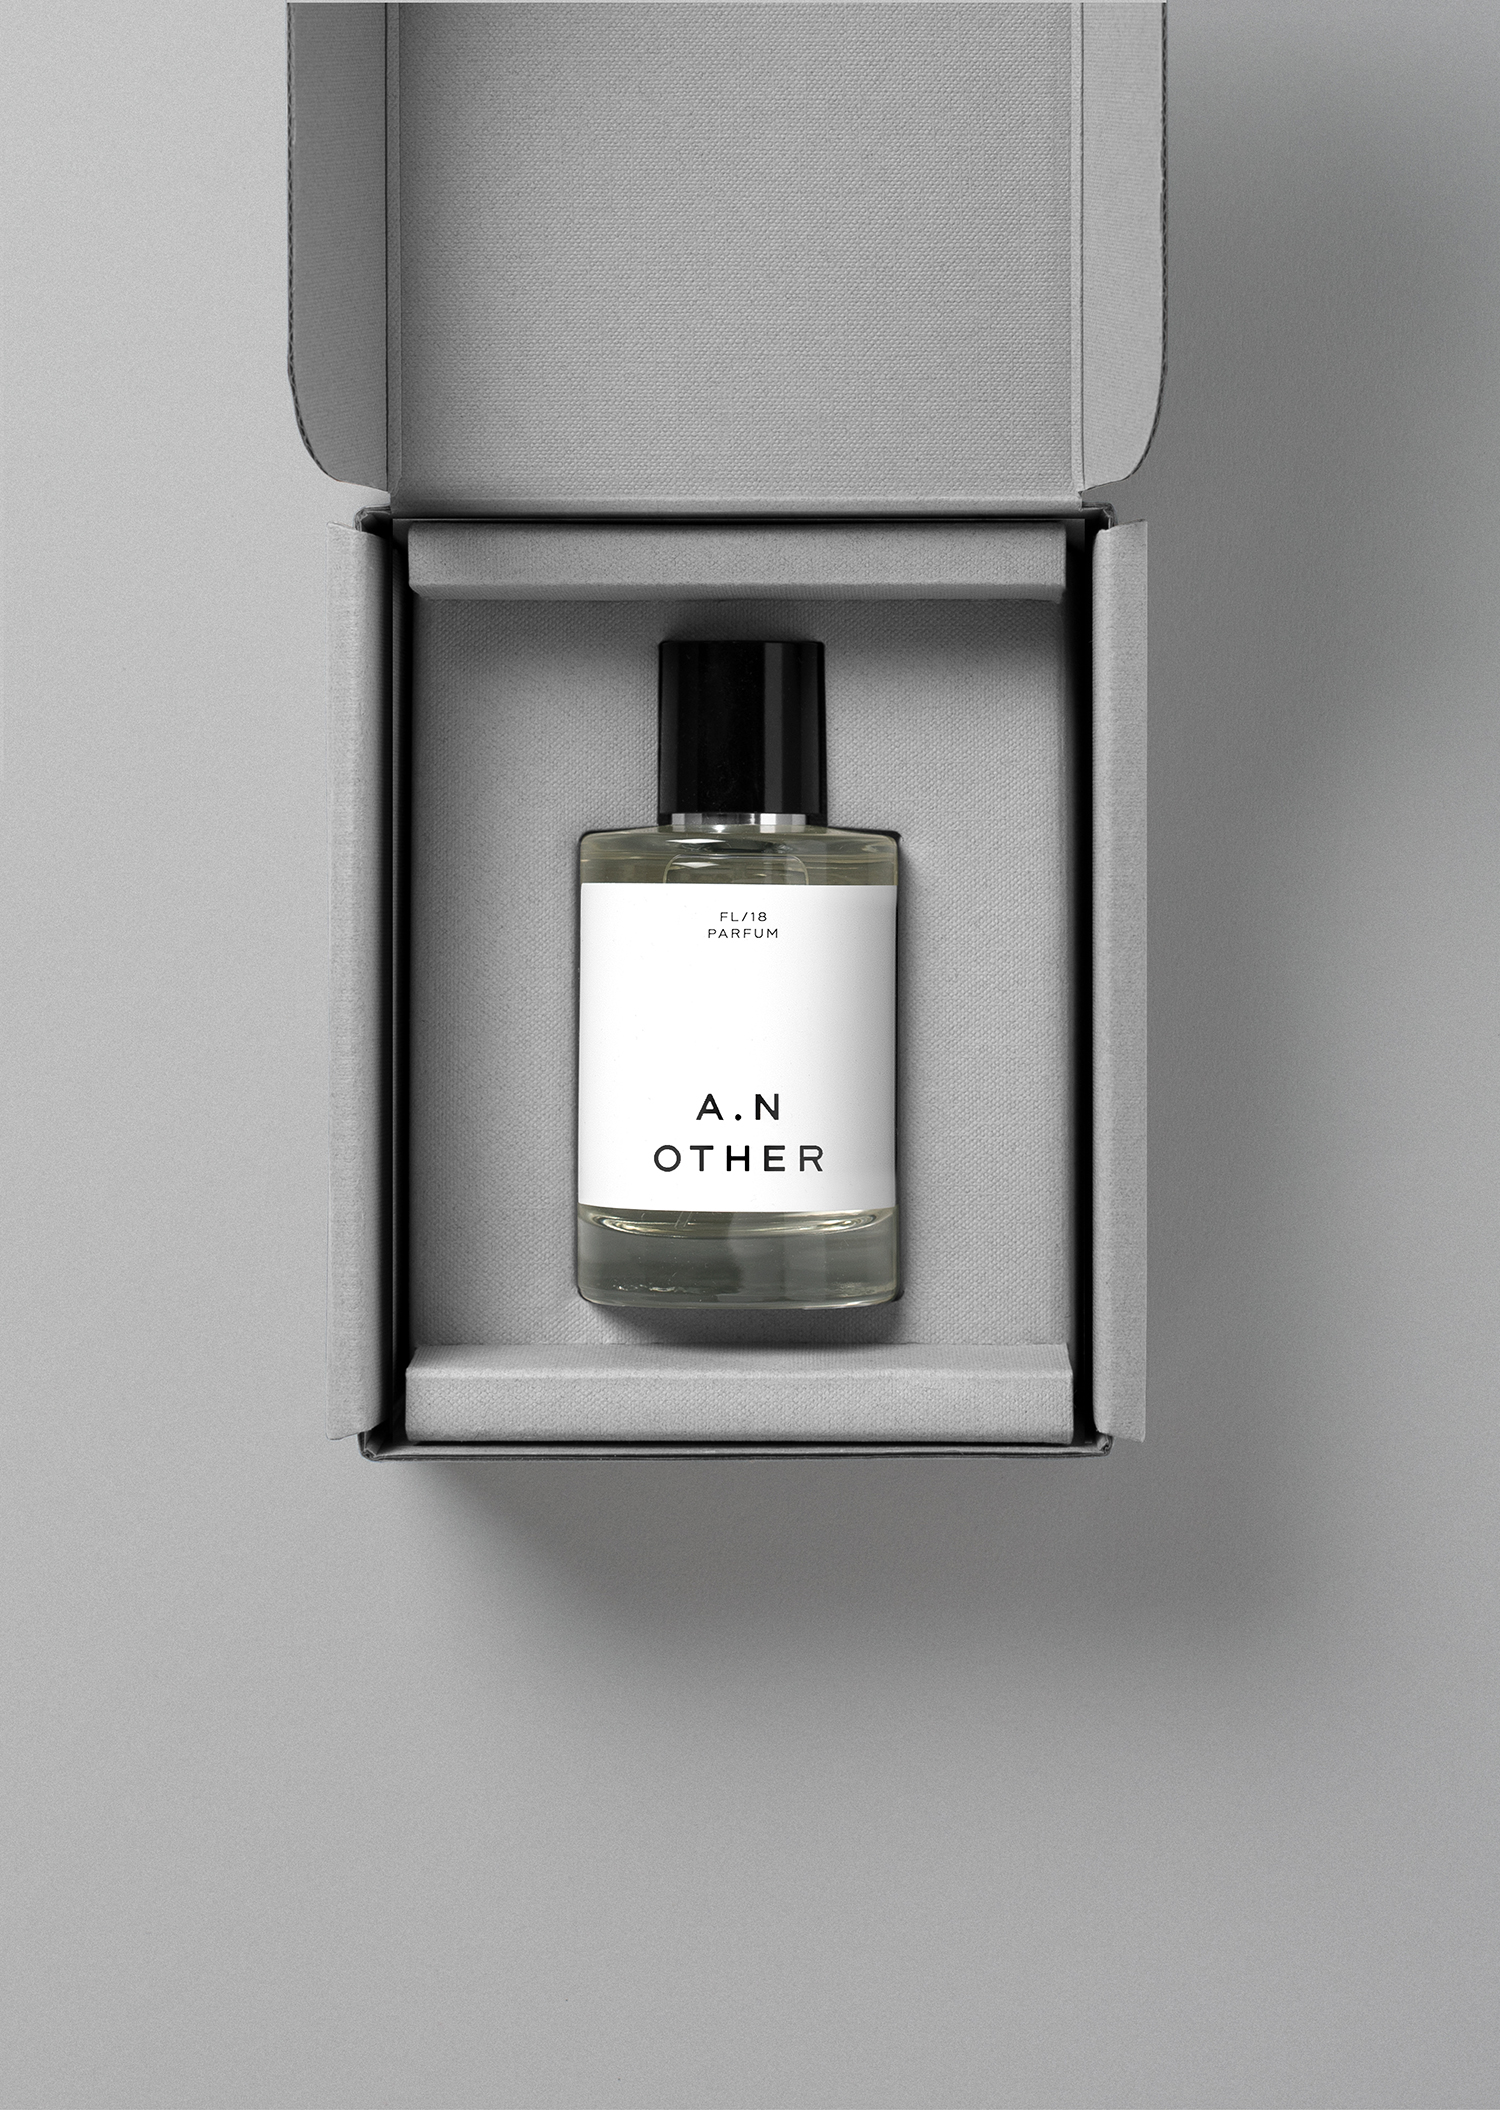 Graphic identity and package design by Socio Design for luxury fragrance brand A.N Other